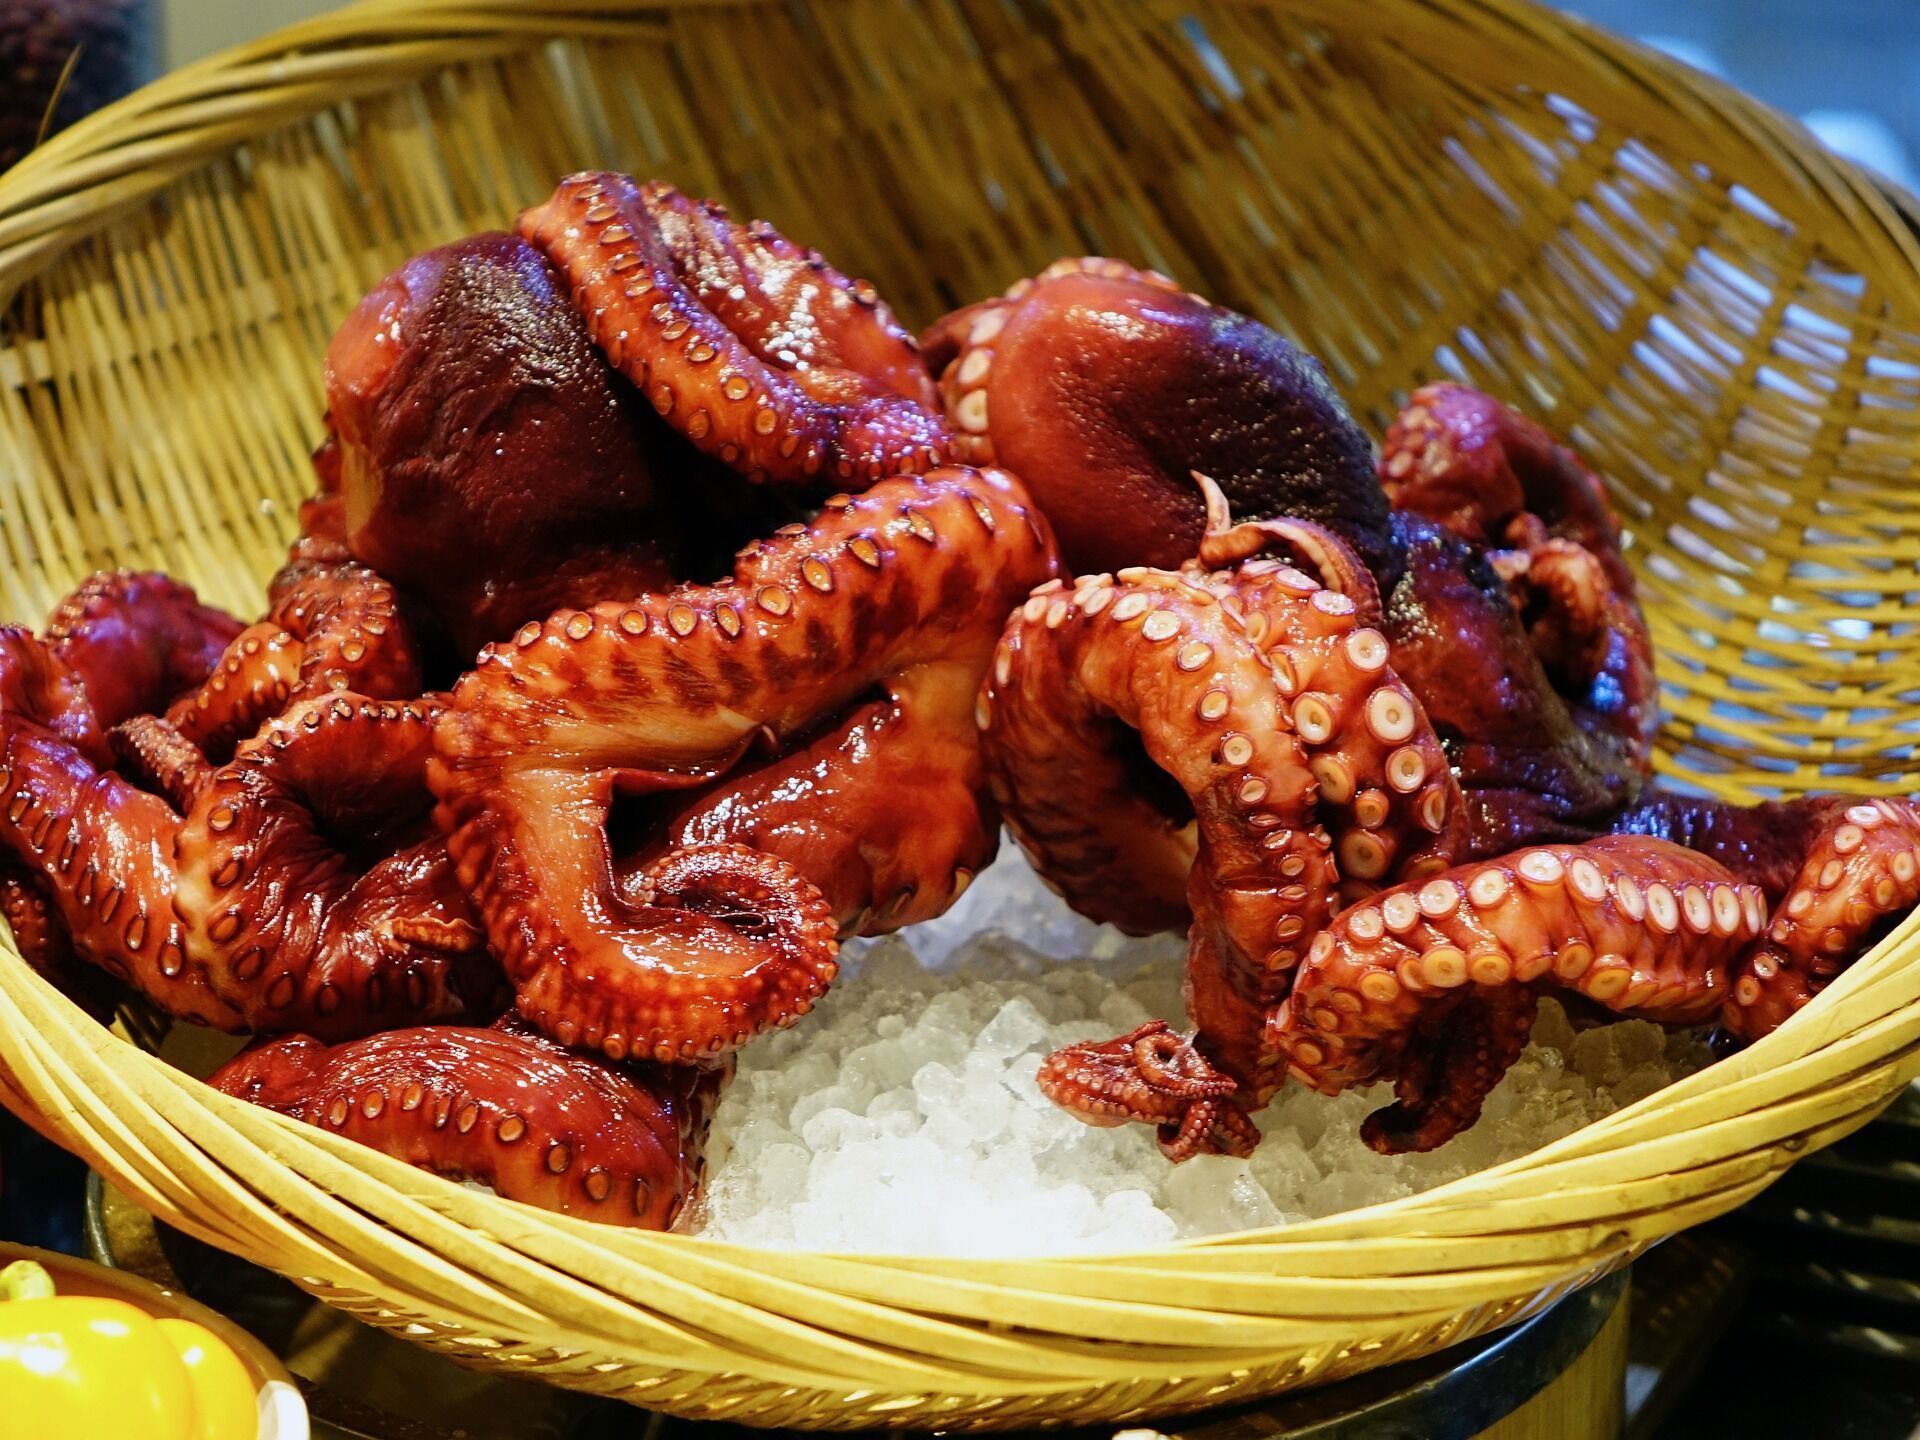 How to choose an octopus in the store